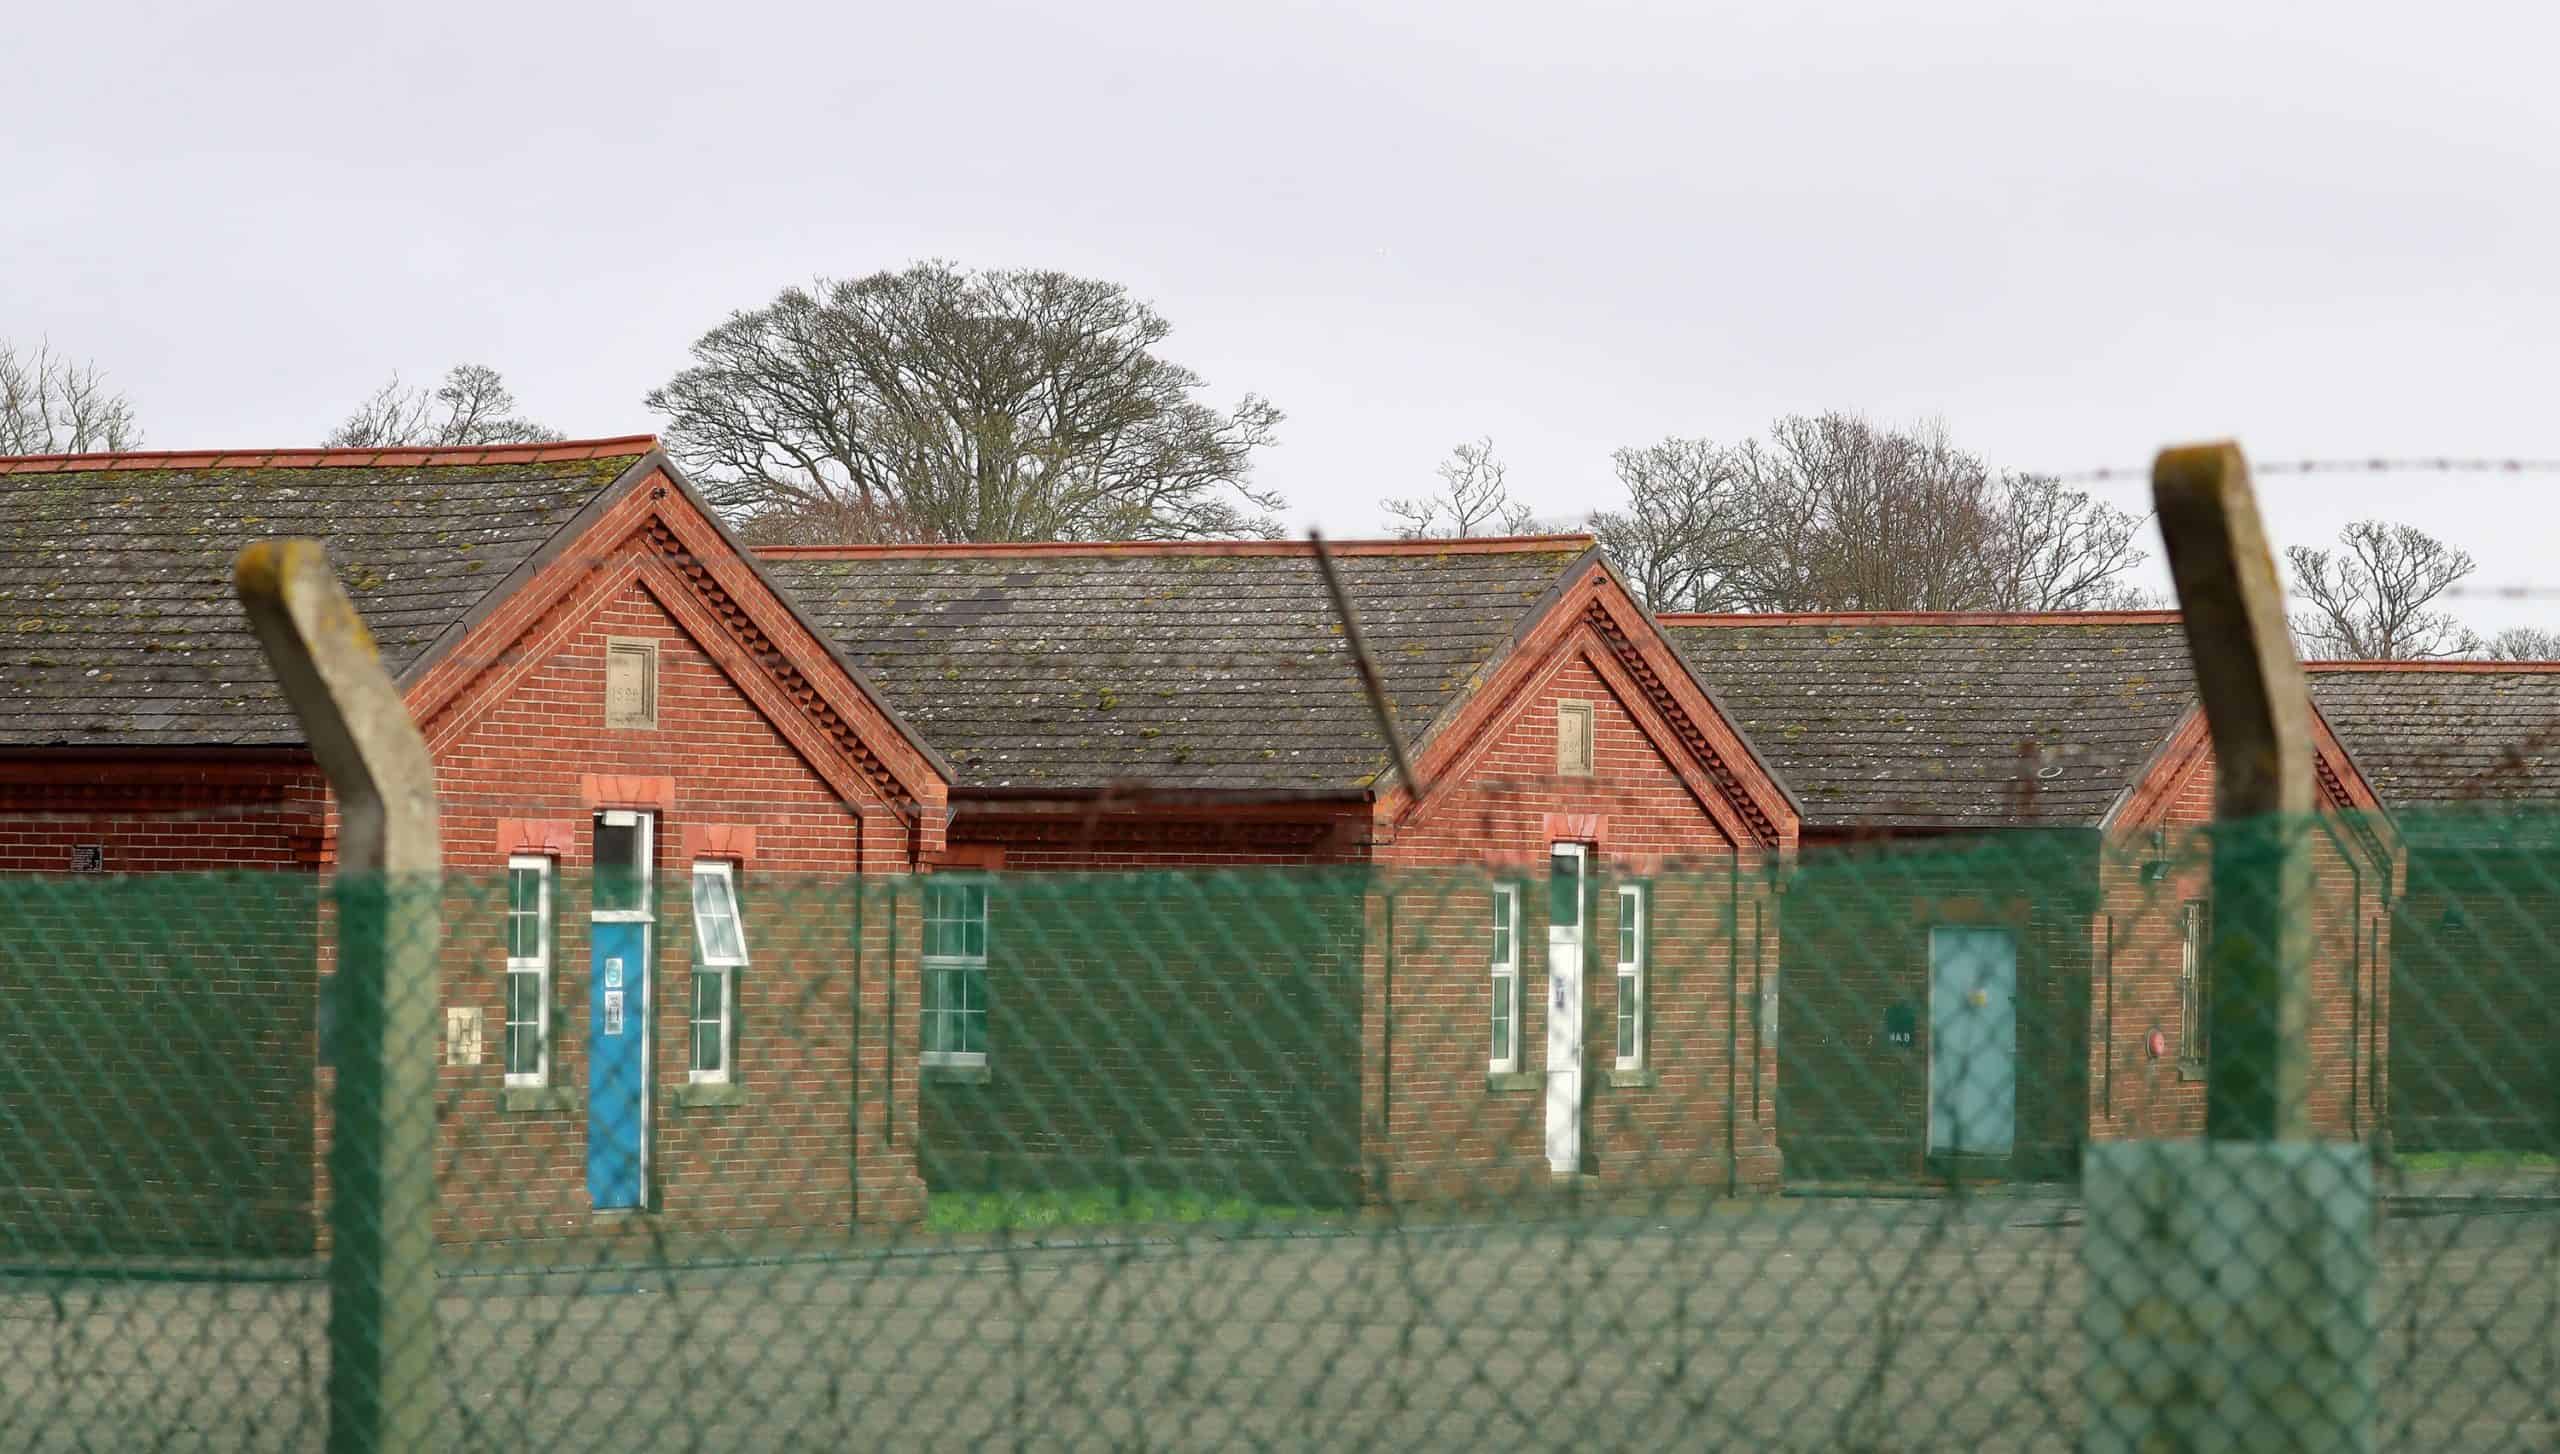 Asylum seekers at barracks ‘powerless to protect themselves’ against spread of Covid